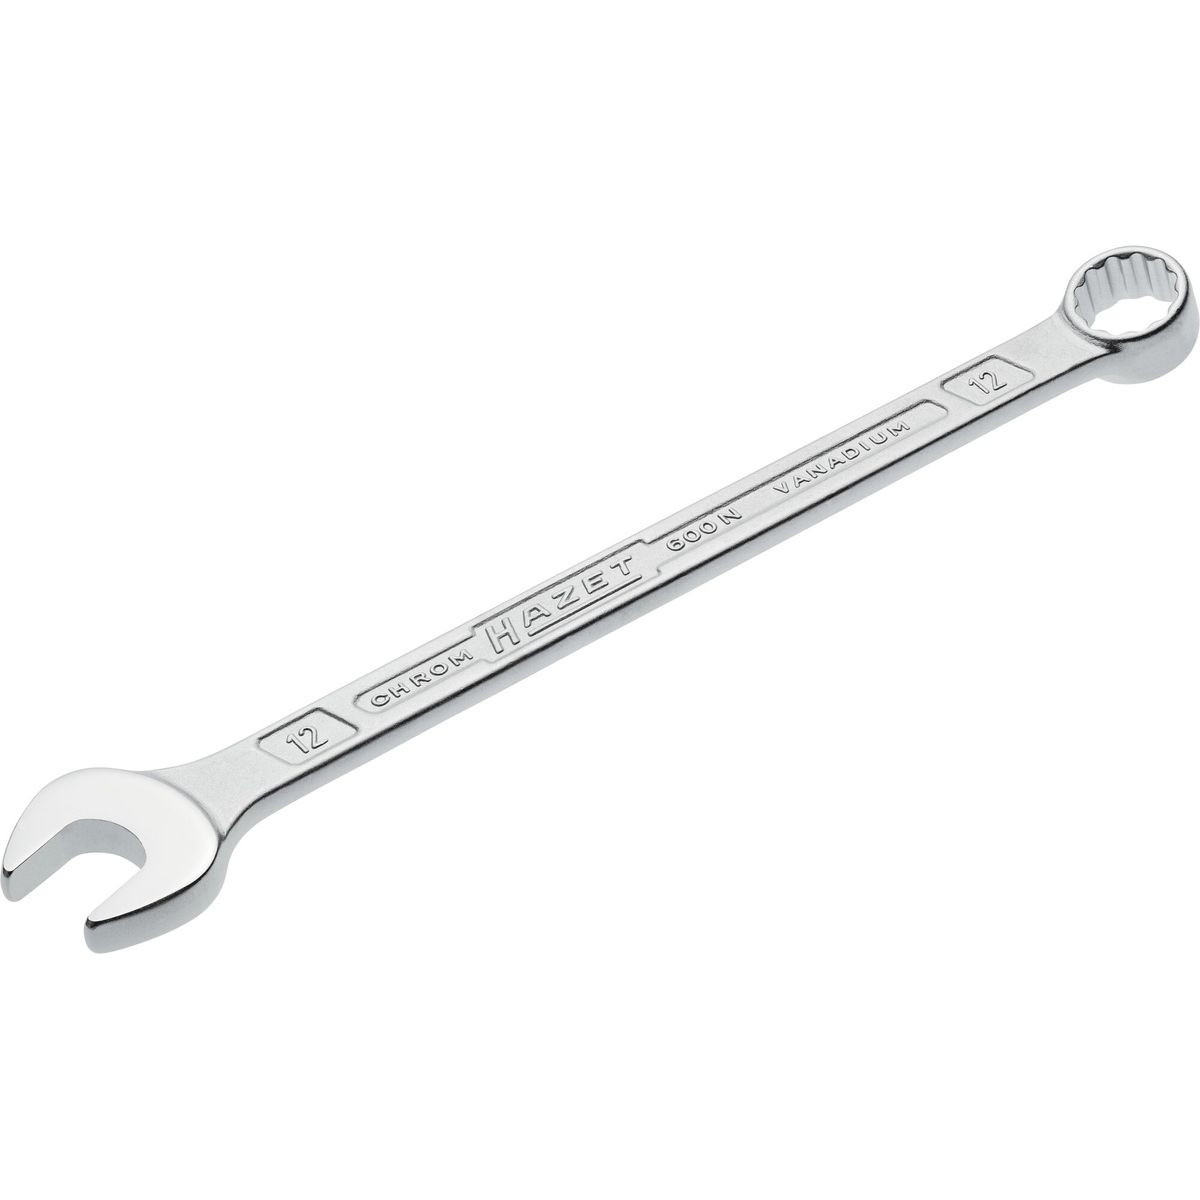 Combination Wrench No.600N-12 Hazet®